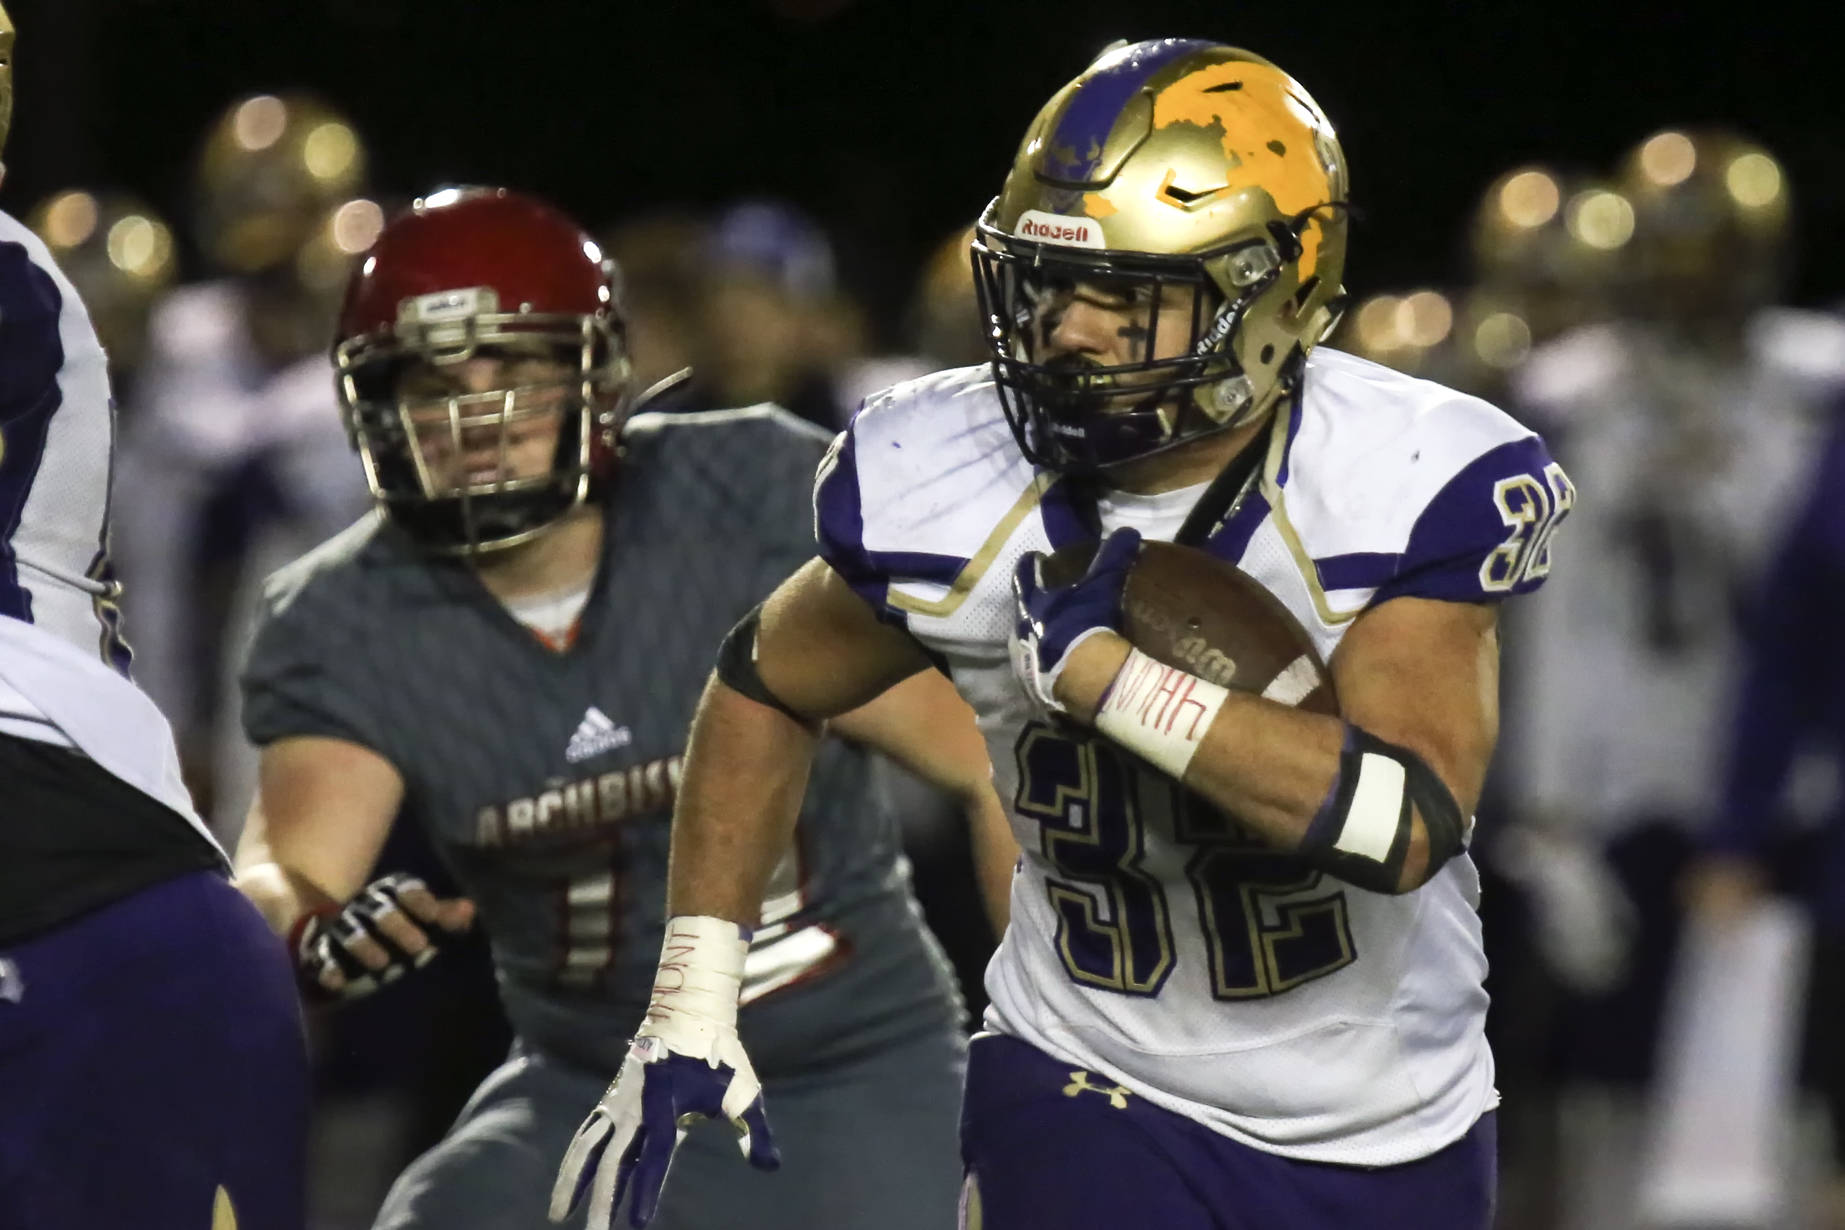 &lt;em&gt;North Kitsap’s Dax Solis rushes with Archbishop Murphy’s John Land-Quinn giving chase Nov. 17 at Veterans Memorial Stadium in Snohomish. &lt;/em&gt;Kevin Clark/The (Everett) Daily Herald